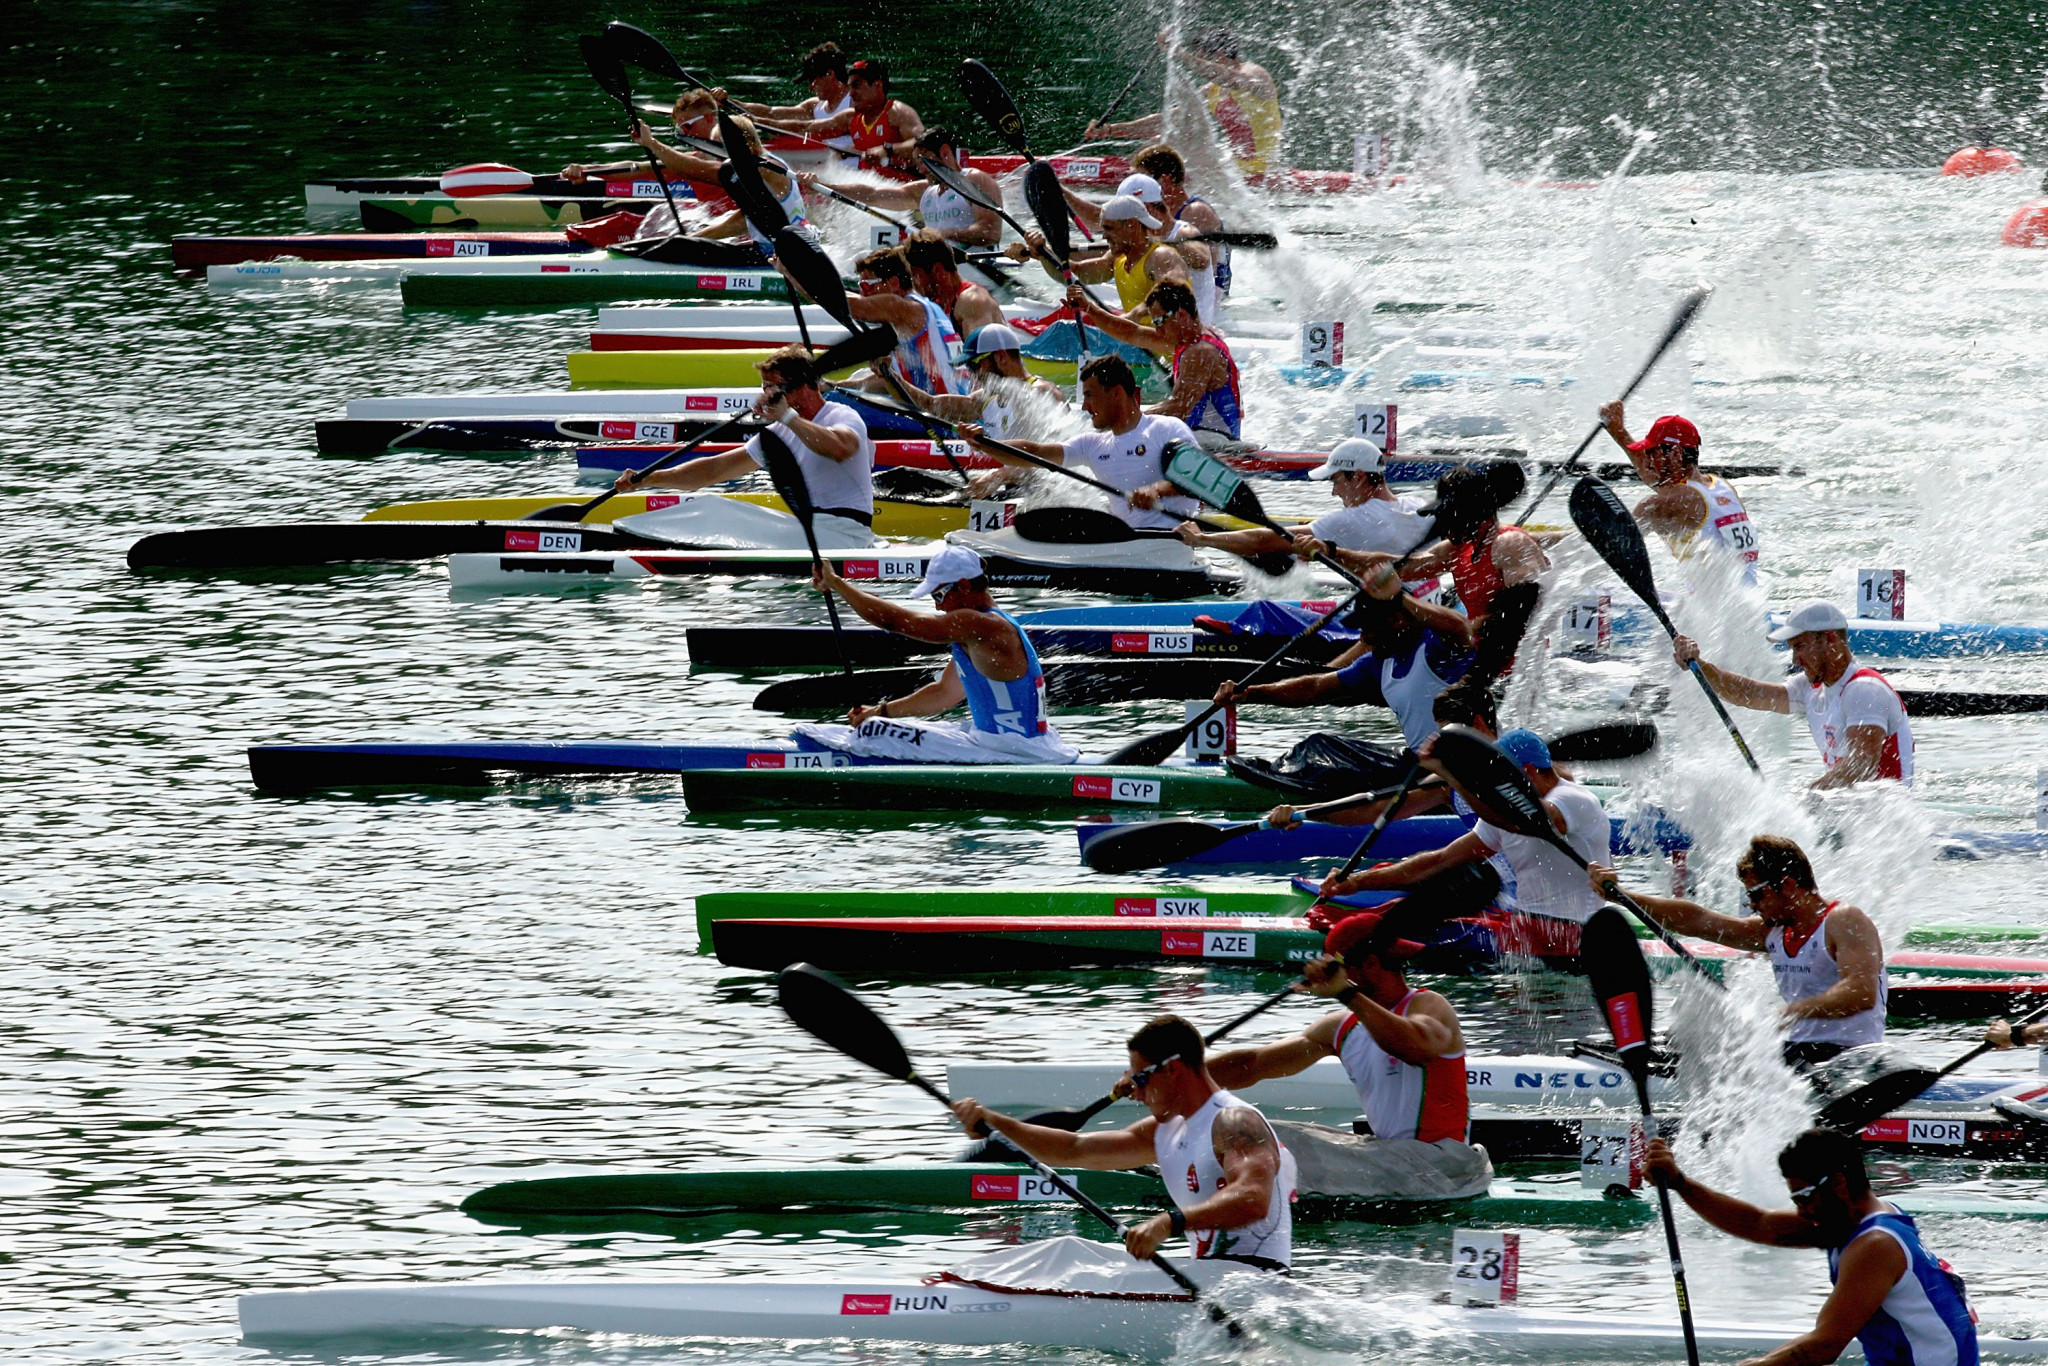 The International Canoe Federation hope the case will act as a warning to young athletes ©Getty Images